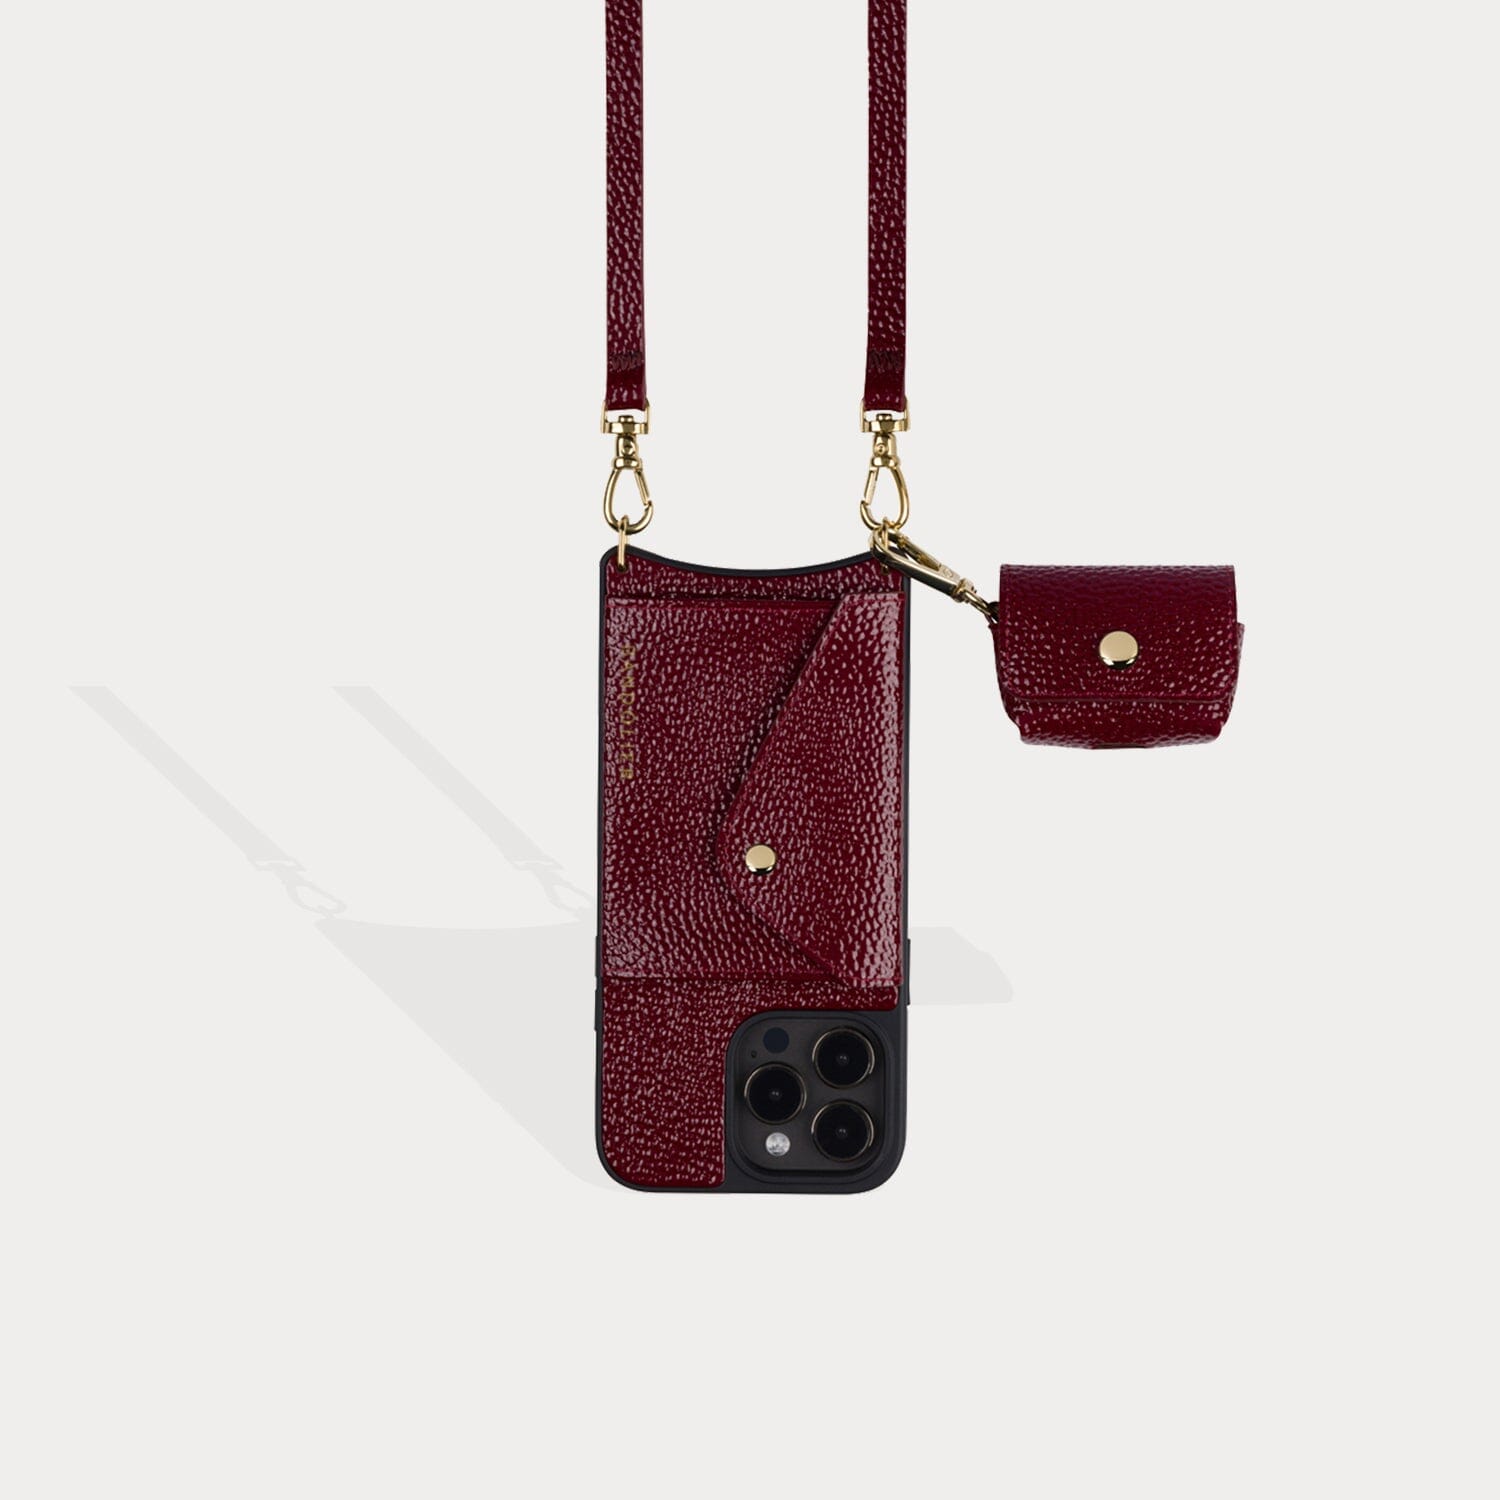 Avery AirPod Clip-On Pouch - Burgundy/Gold Pouch Core Bandolier 